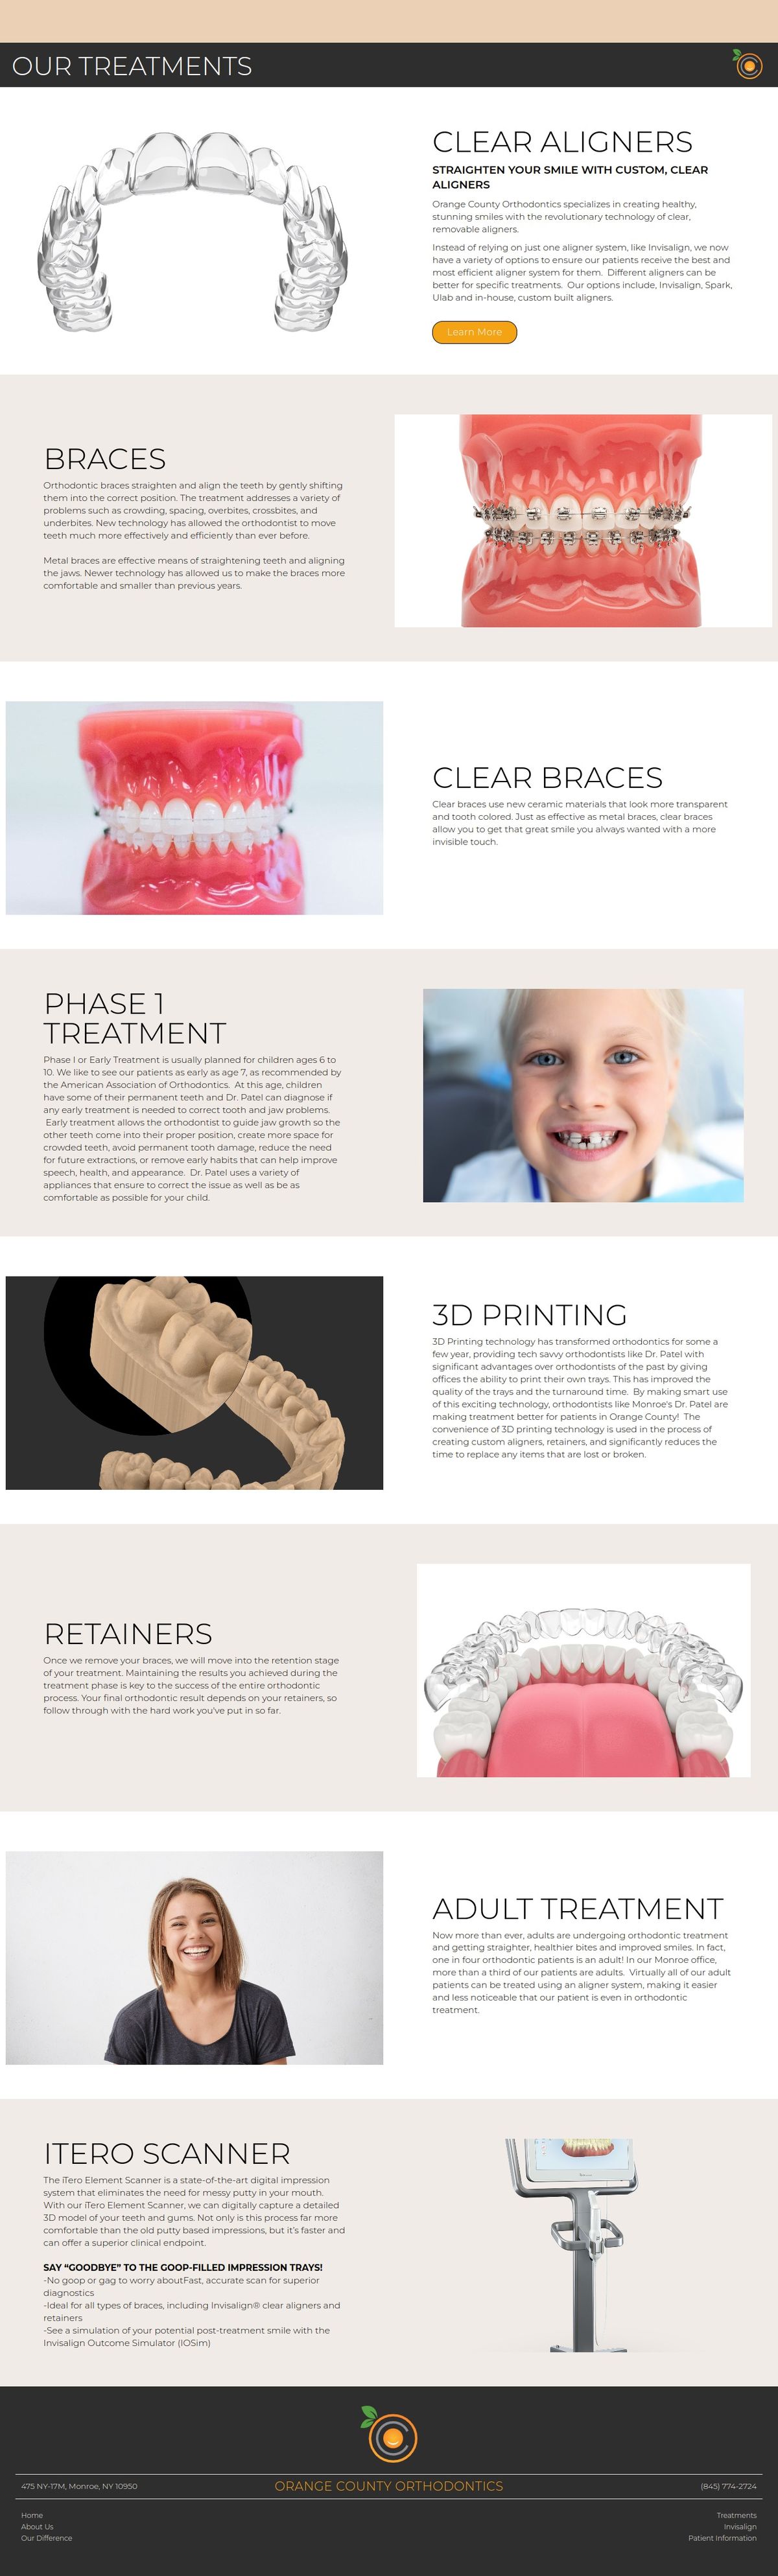 Orthodontic solutions for overbite correction